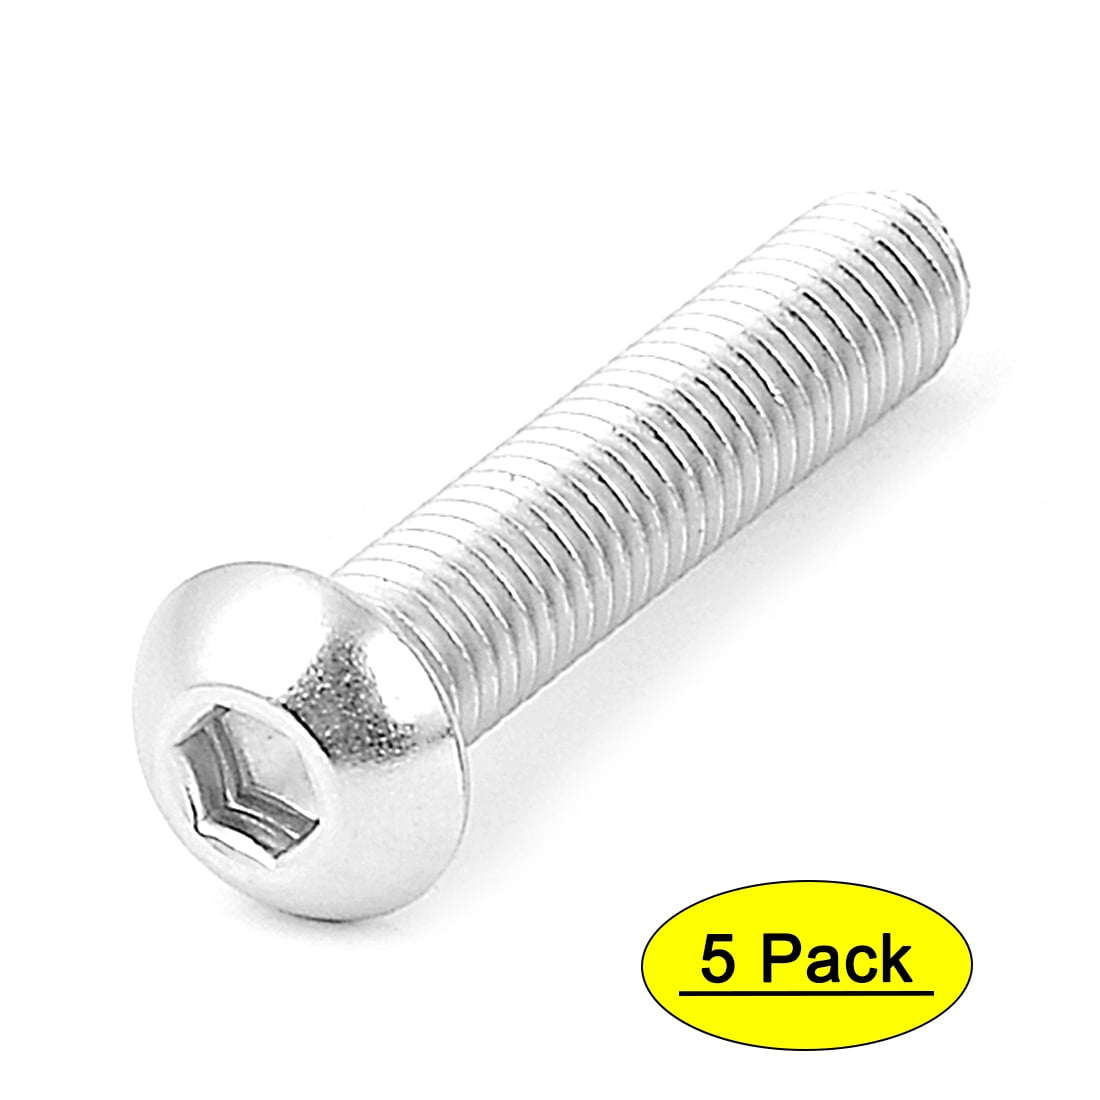 No.8 x 2 3/4-20 Pack A2 Stainless Steel Slotted Flat Head Countersunk Wood Screws DIN 97 4 x 70 